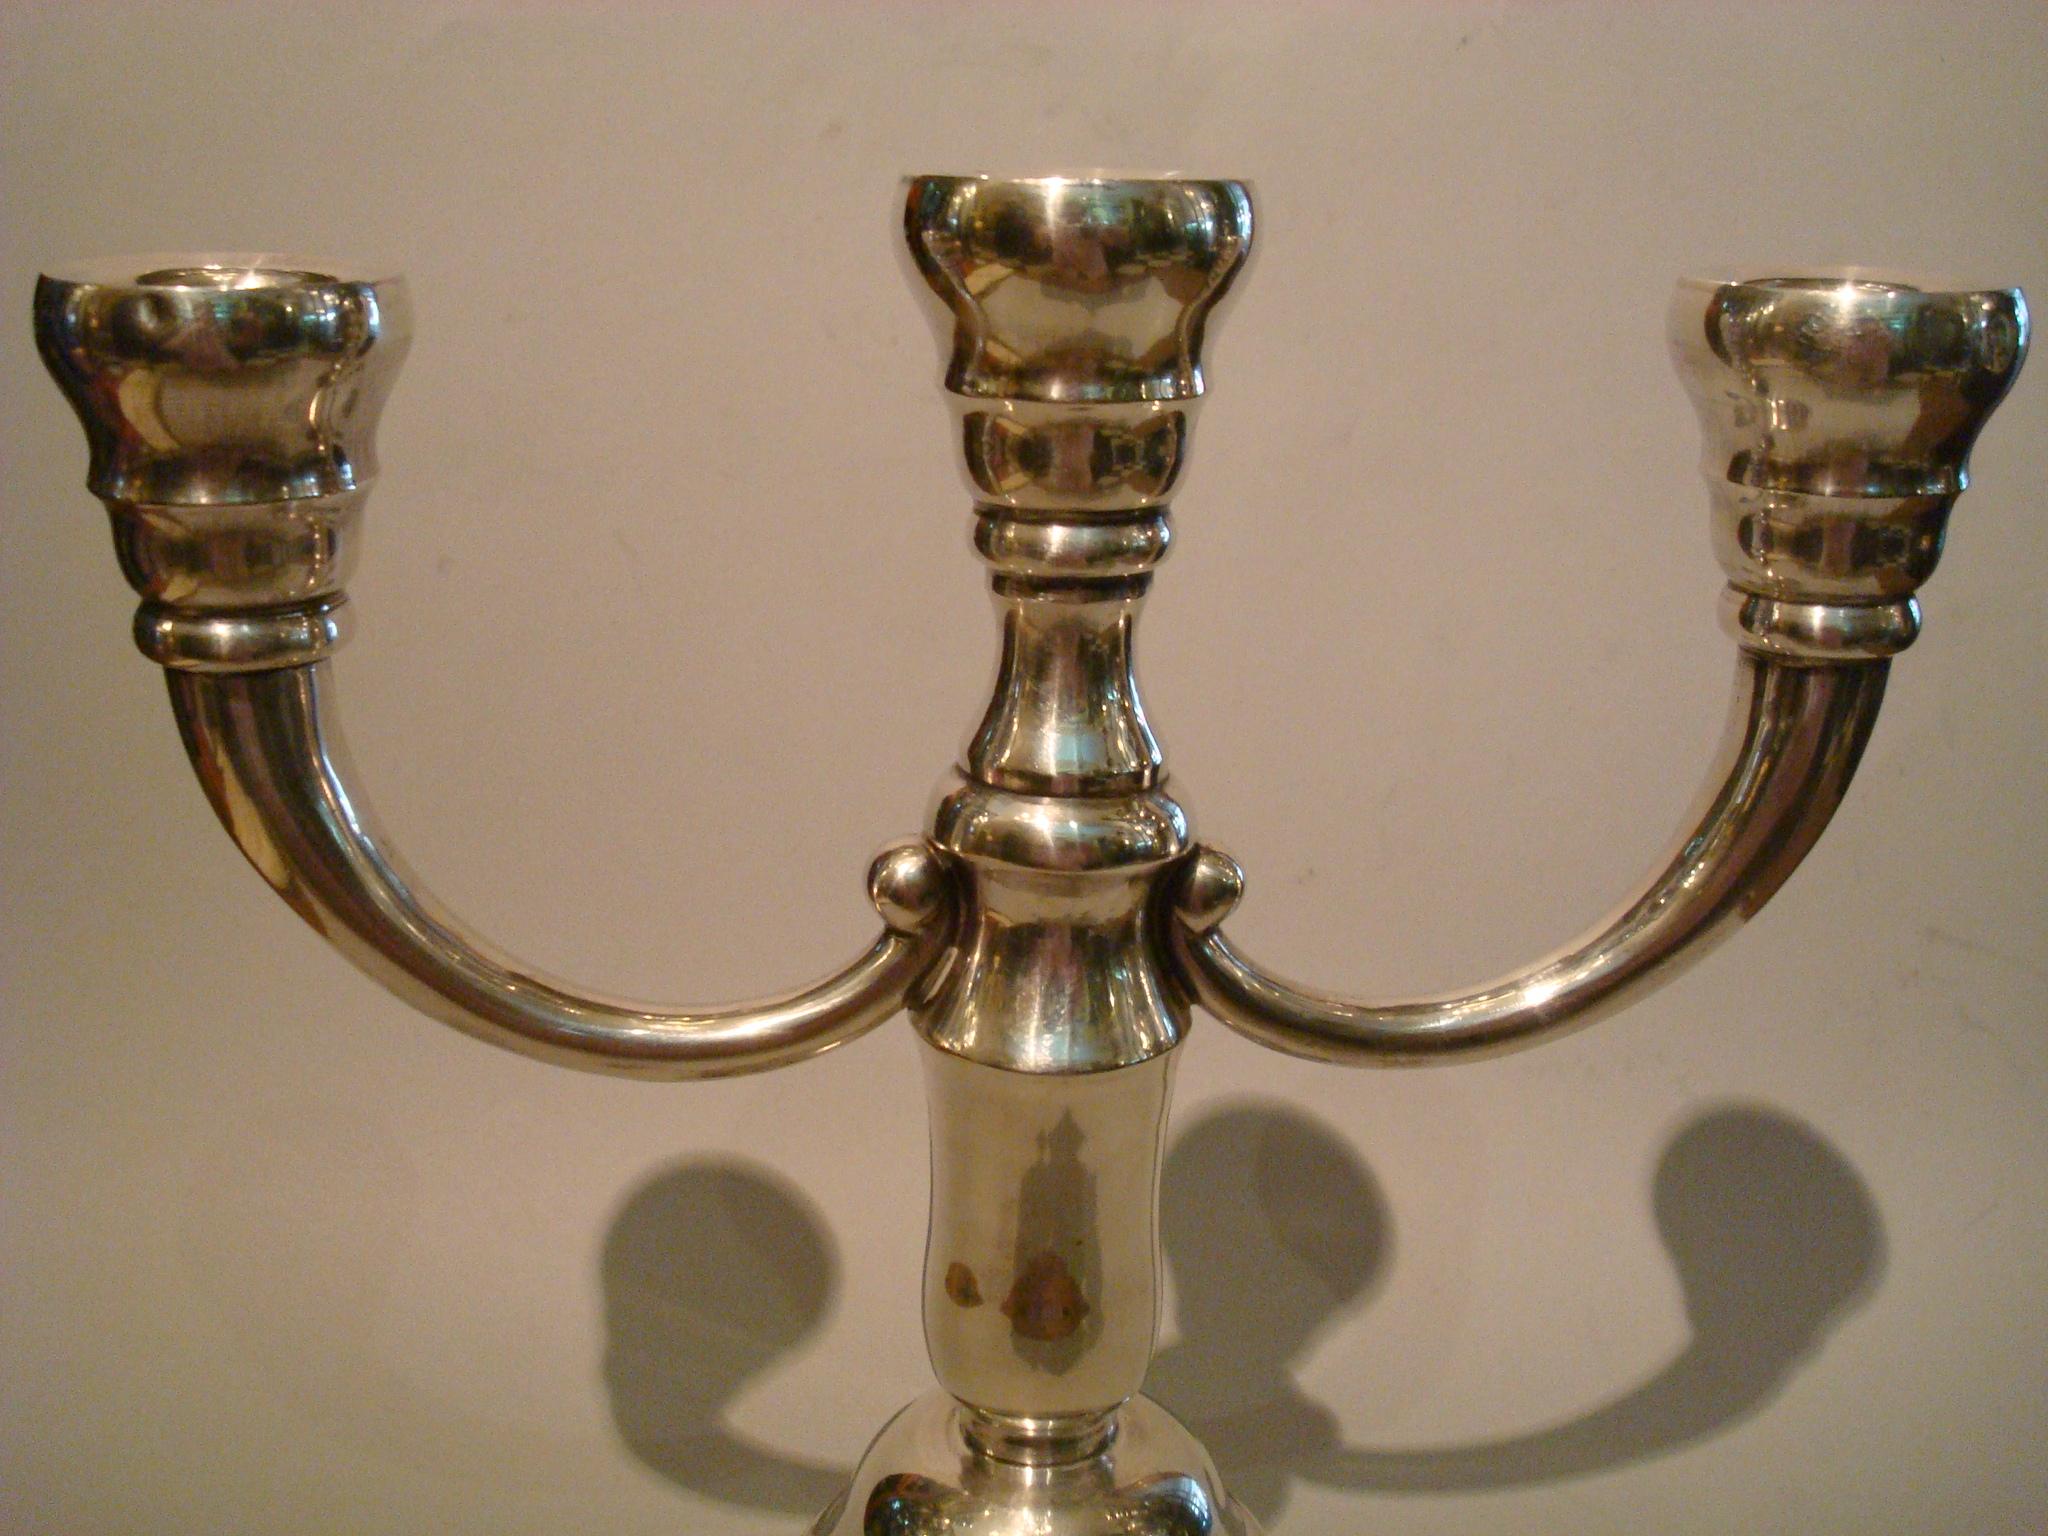 20th Century Pair of Art Deco Candlesticks Made of Italian Silver, circa 1920s For Sale